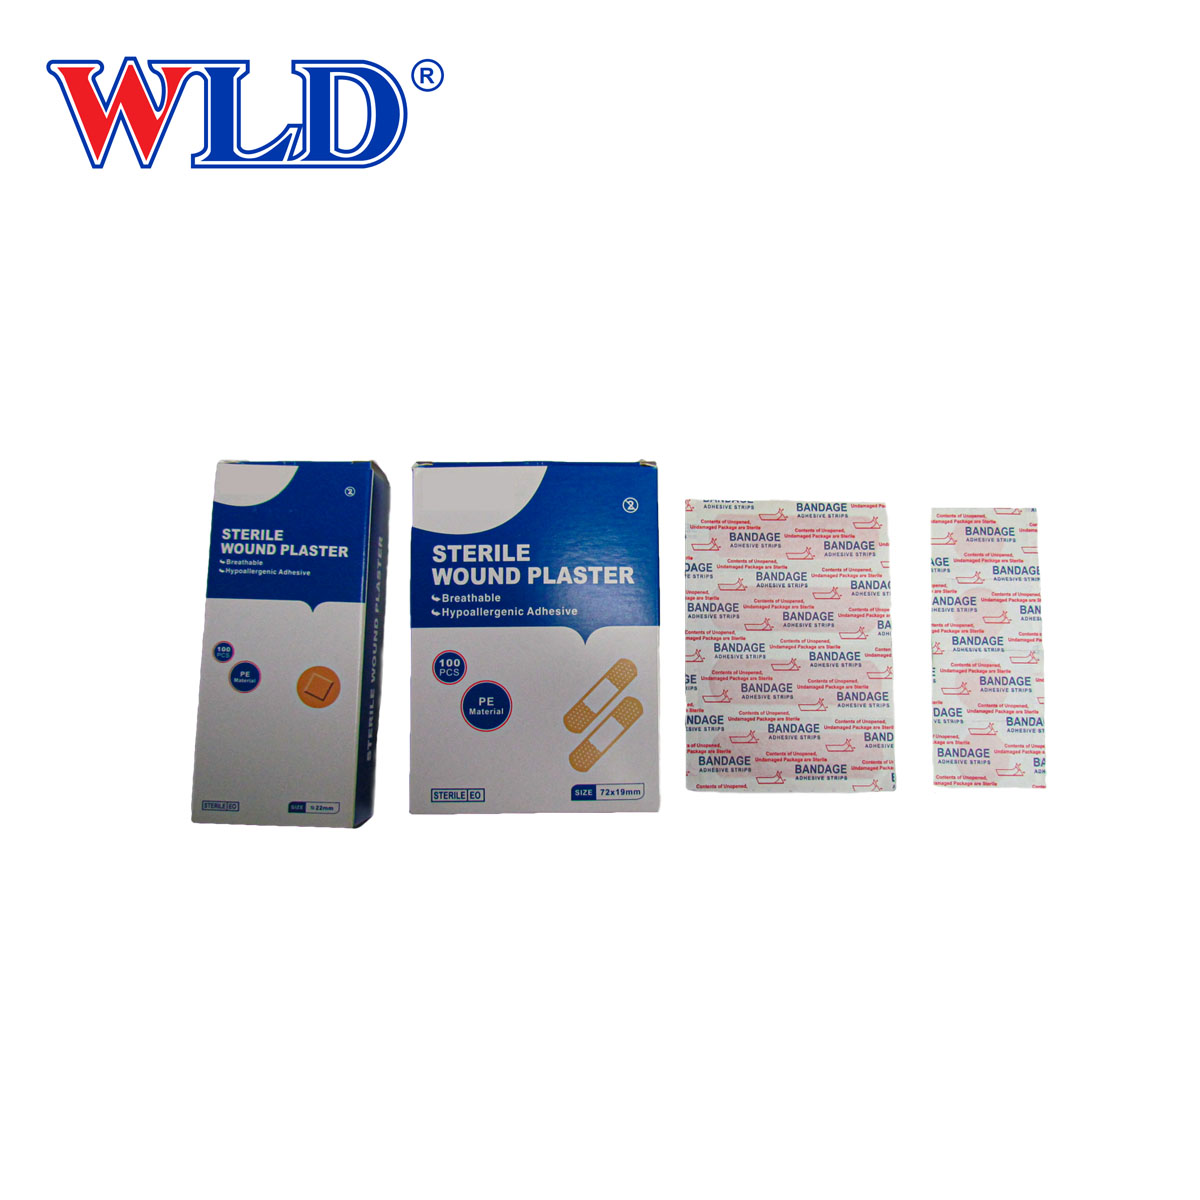 One of Hottest for Wound Care - Band Aid – WLD